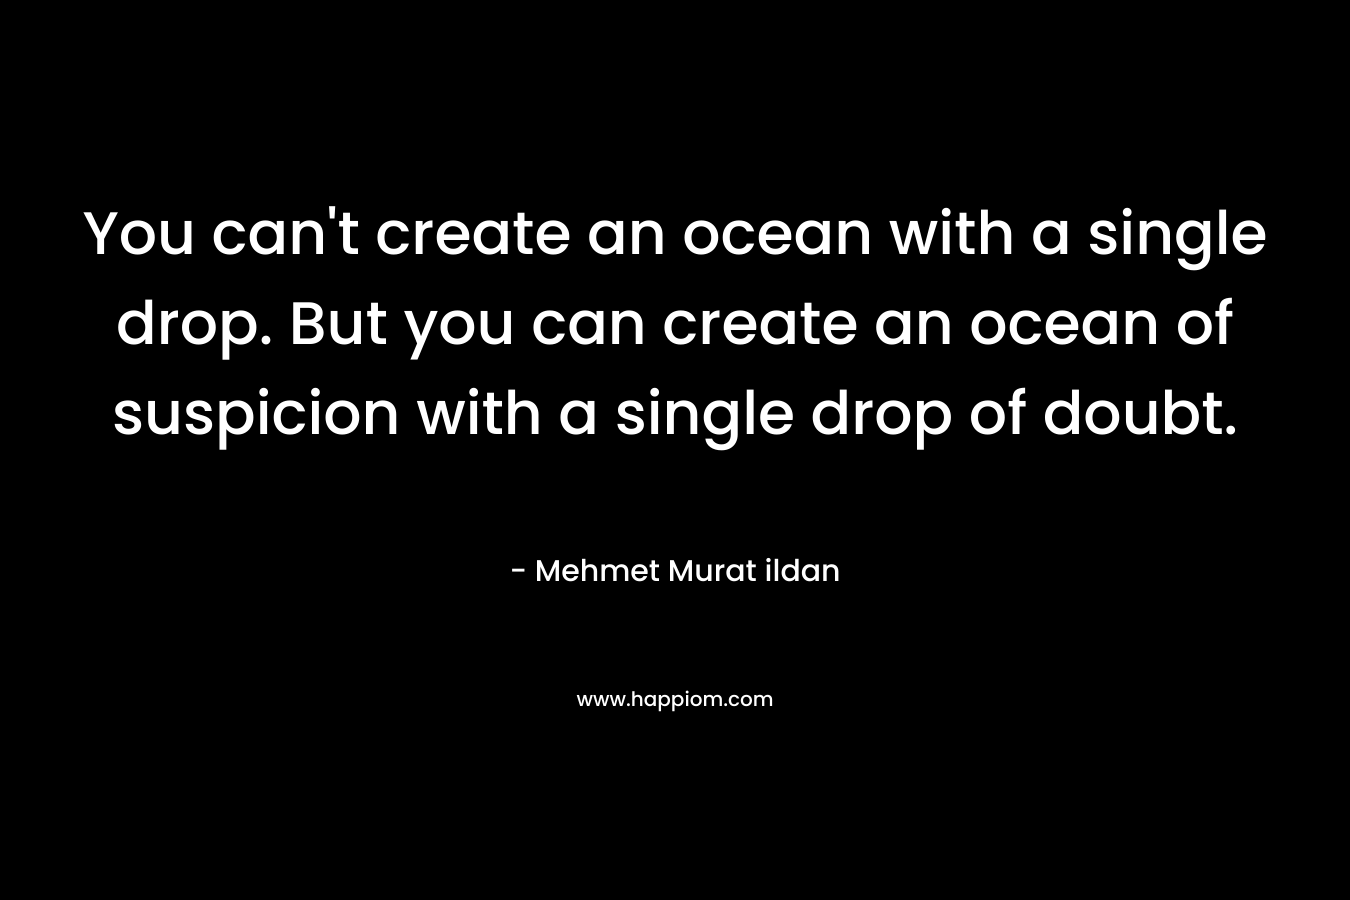 You can't create an ocean with a single drop. But you can create an ocean of suspicion with a single drop of doubt.